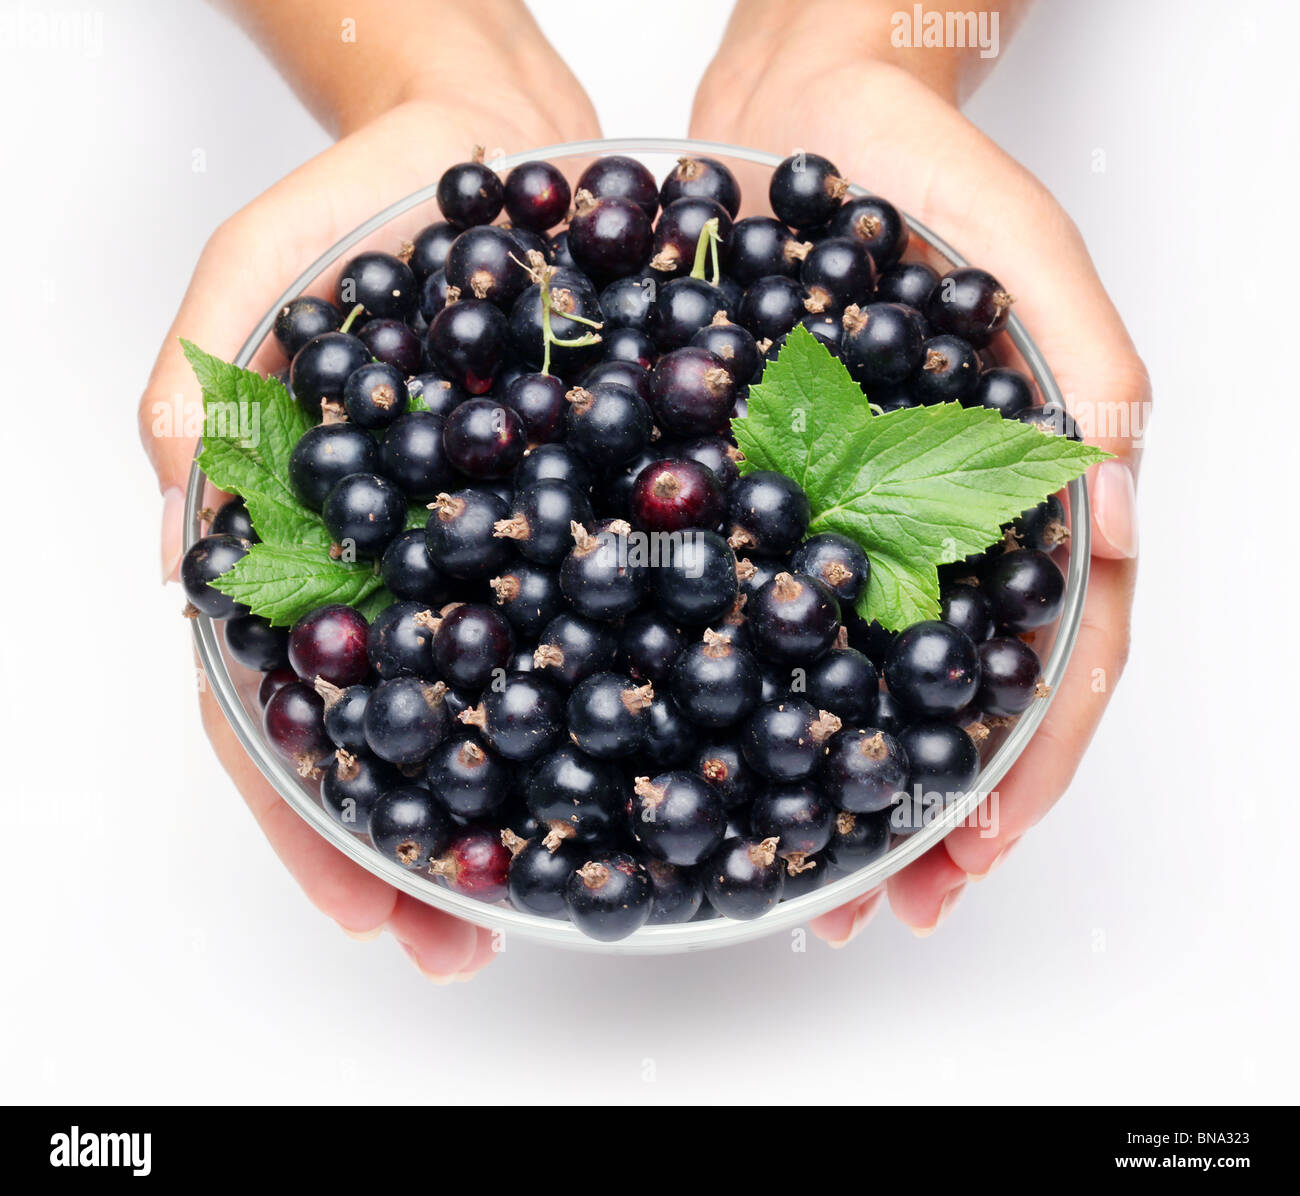 Crockery with black currant in woman hands. Isolated on a white background. Stock Photo